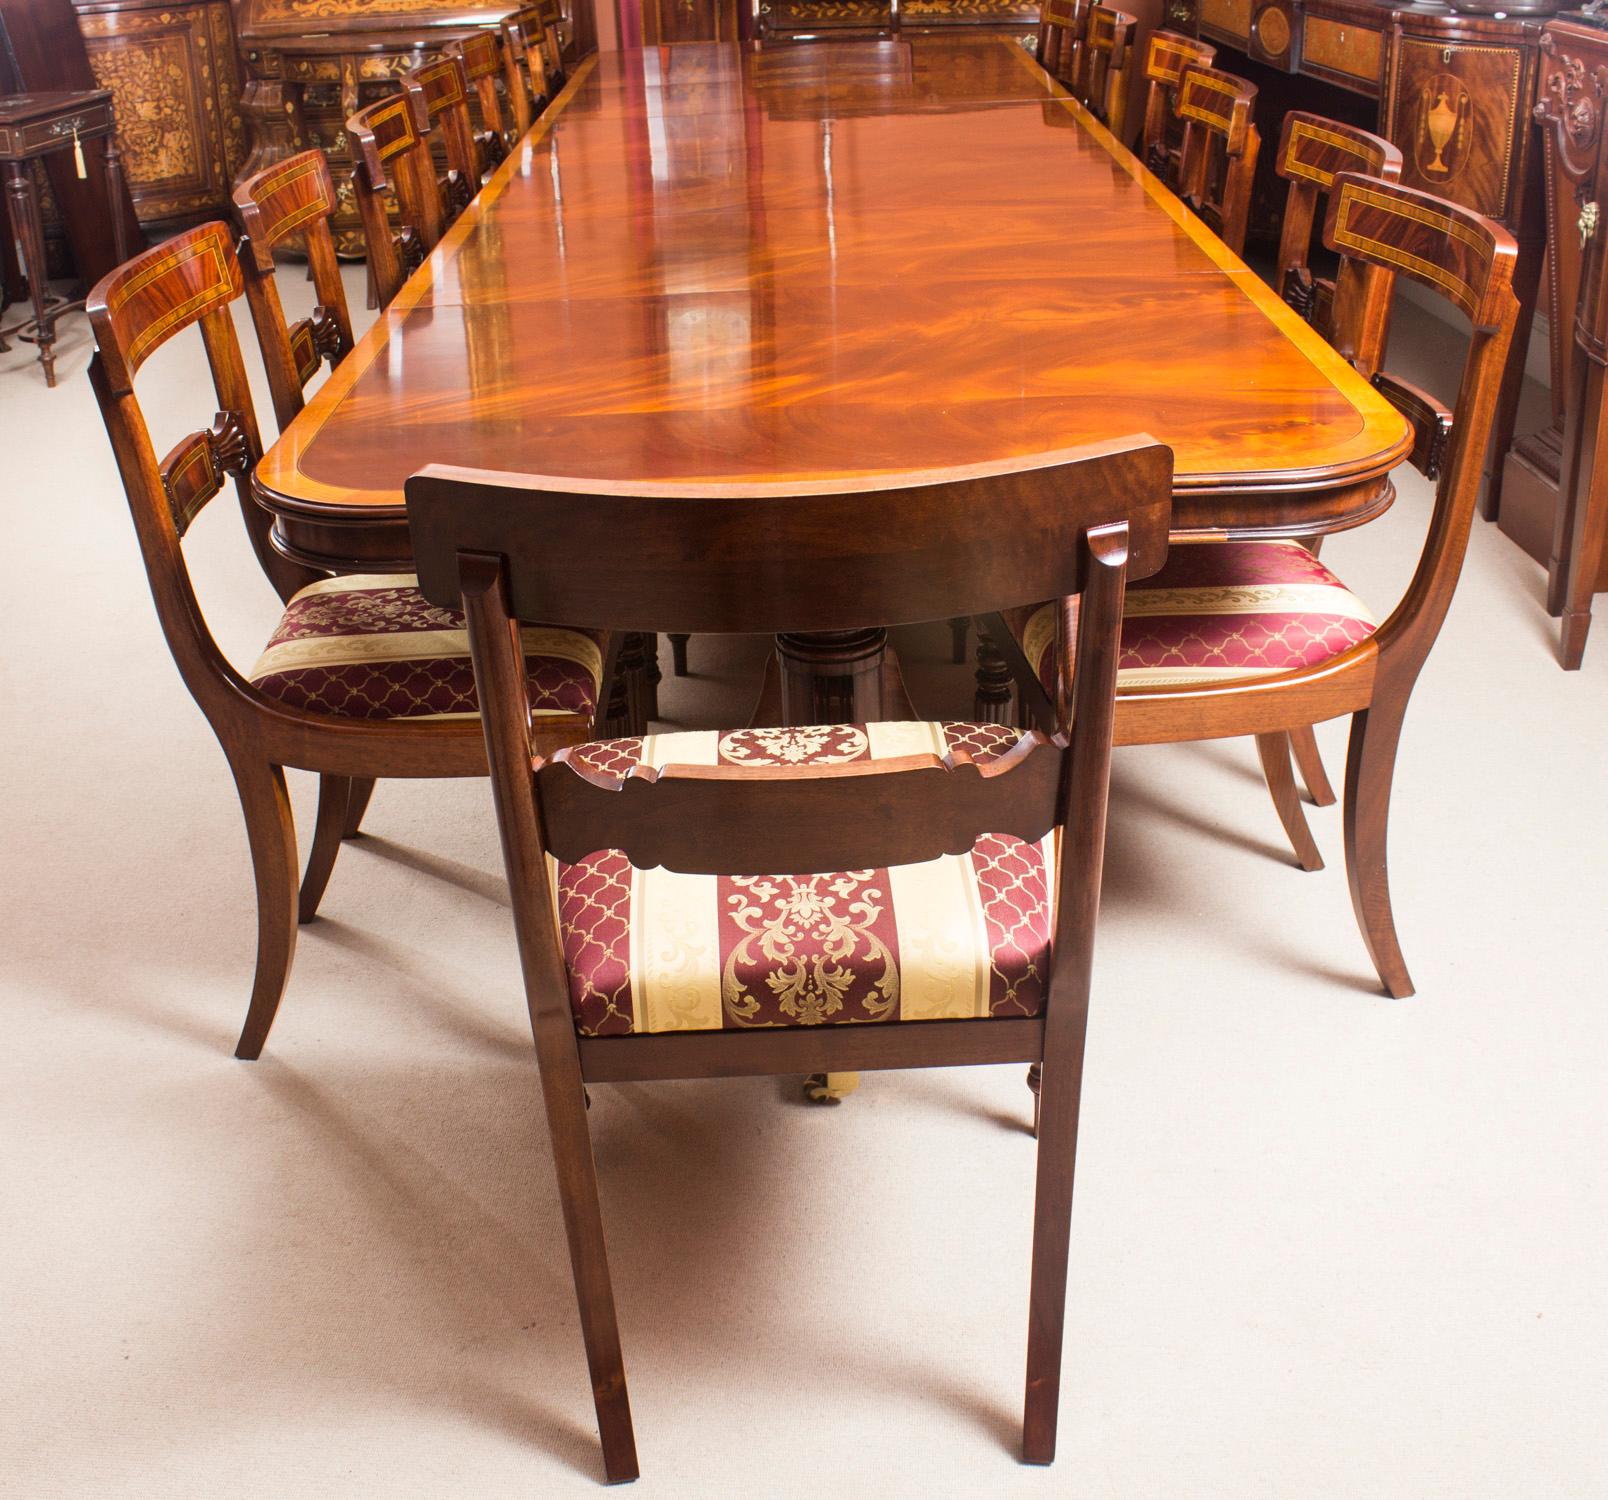 Vintage 14ft Regency Style Dining Table Inlaid Flame Mahogany 20th Century For Sale 1